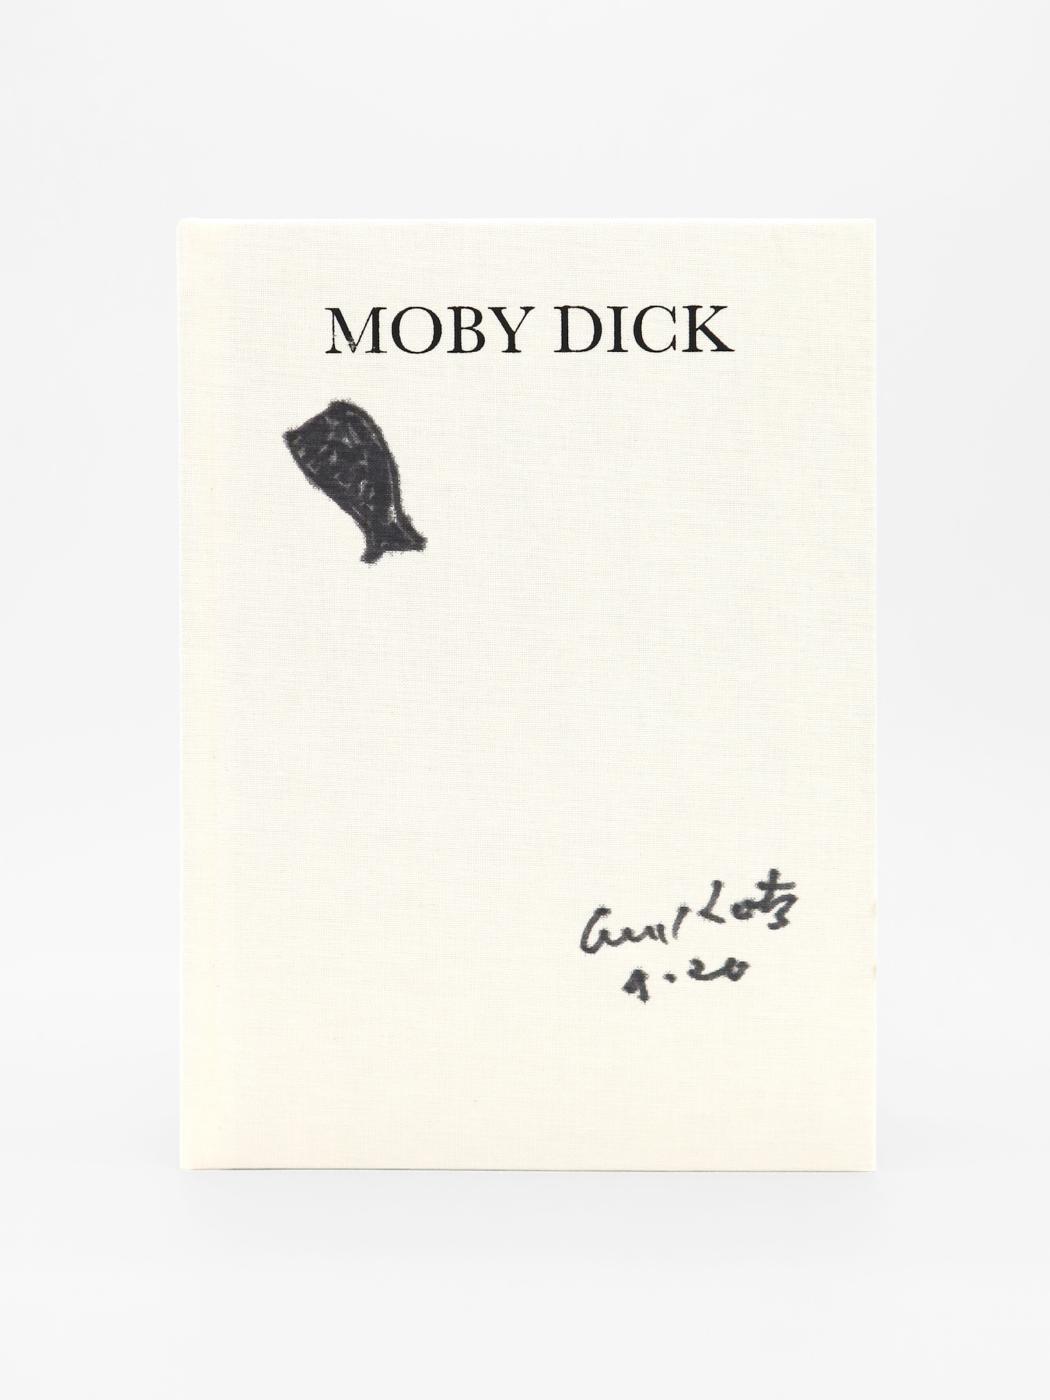 Herman Melville, Moby Dick Special Edition